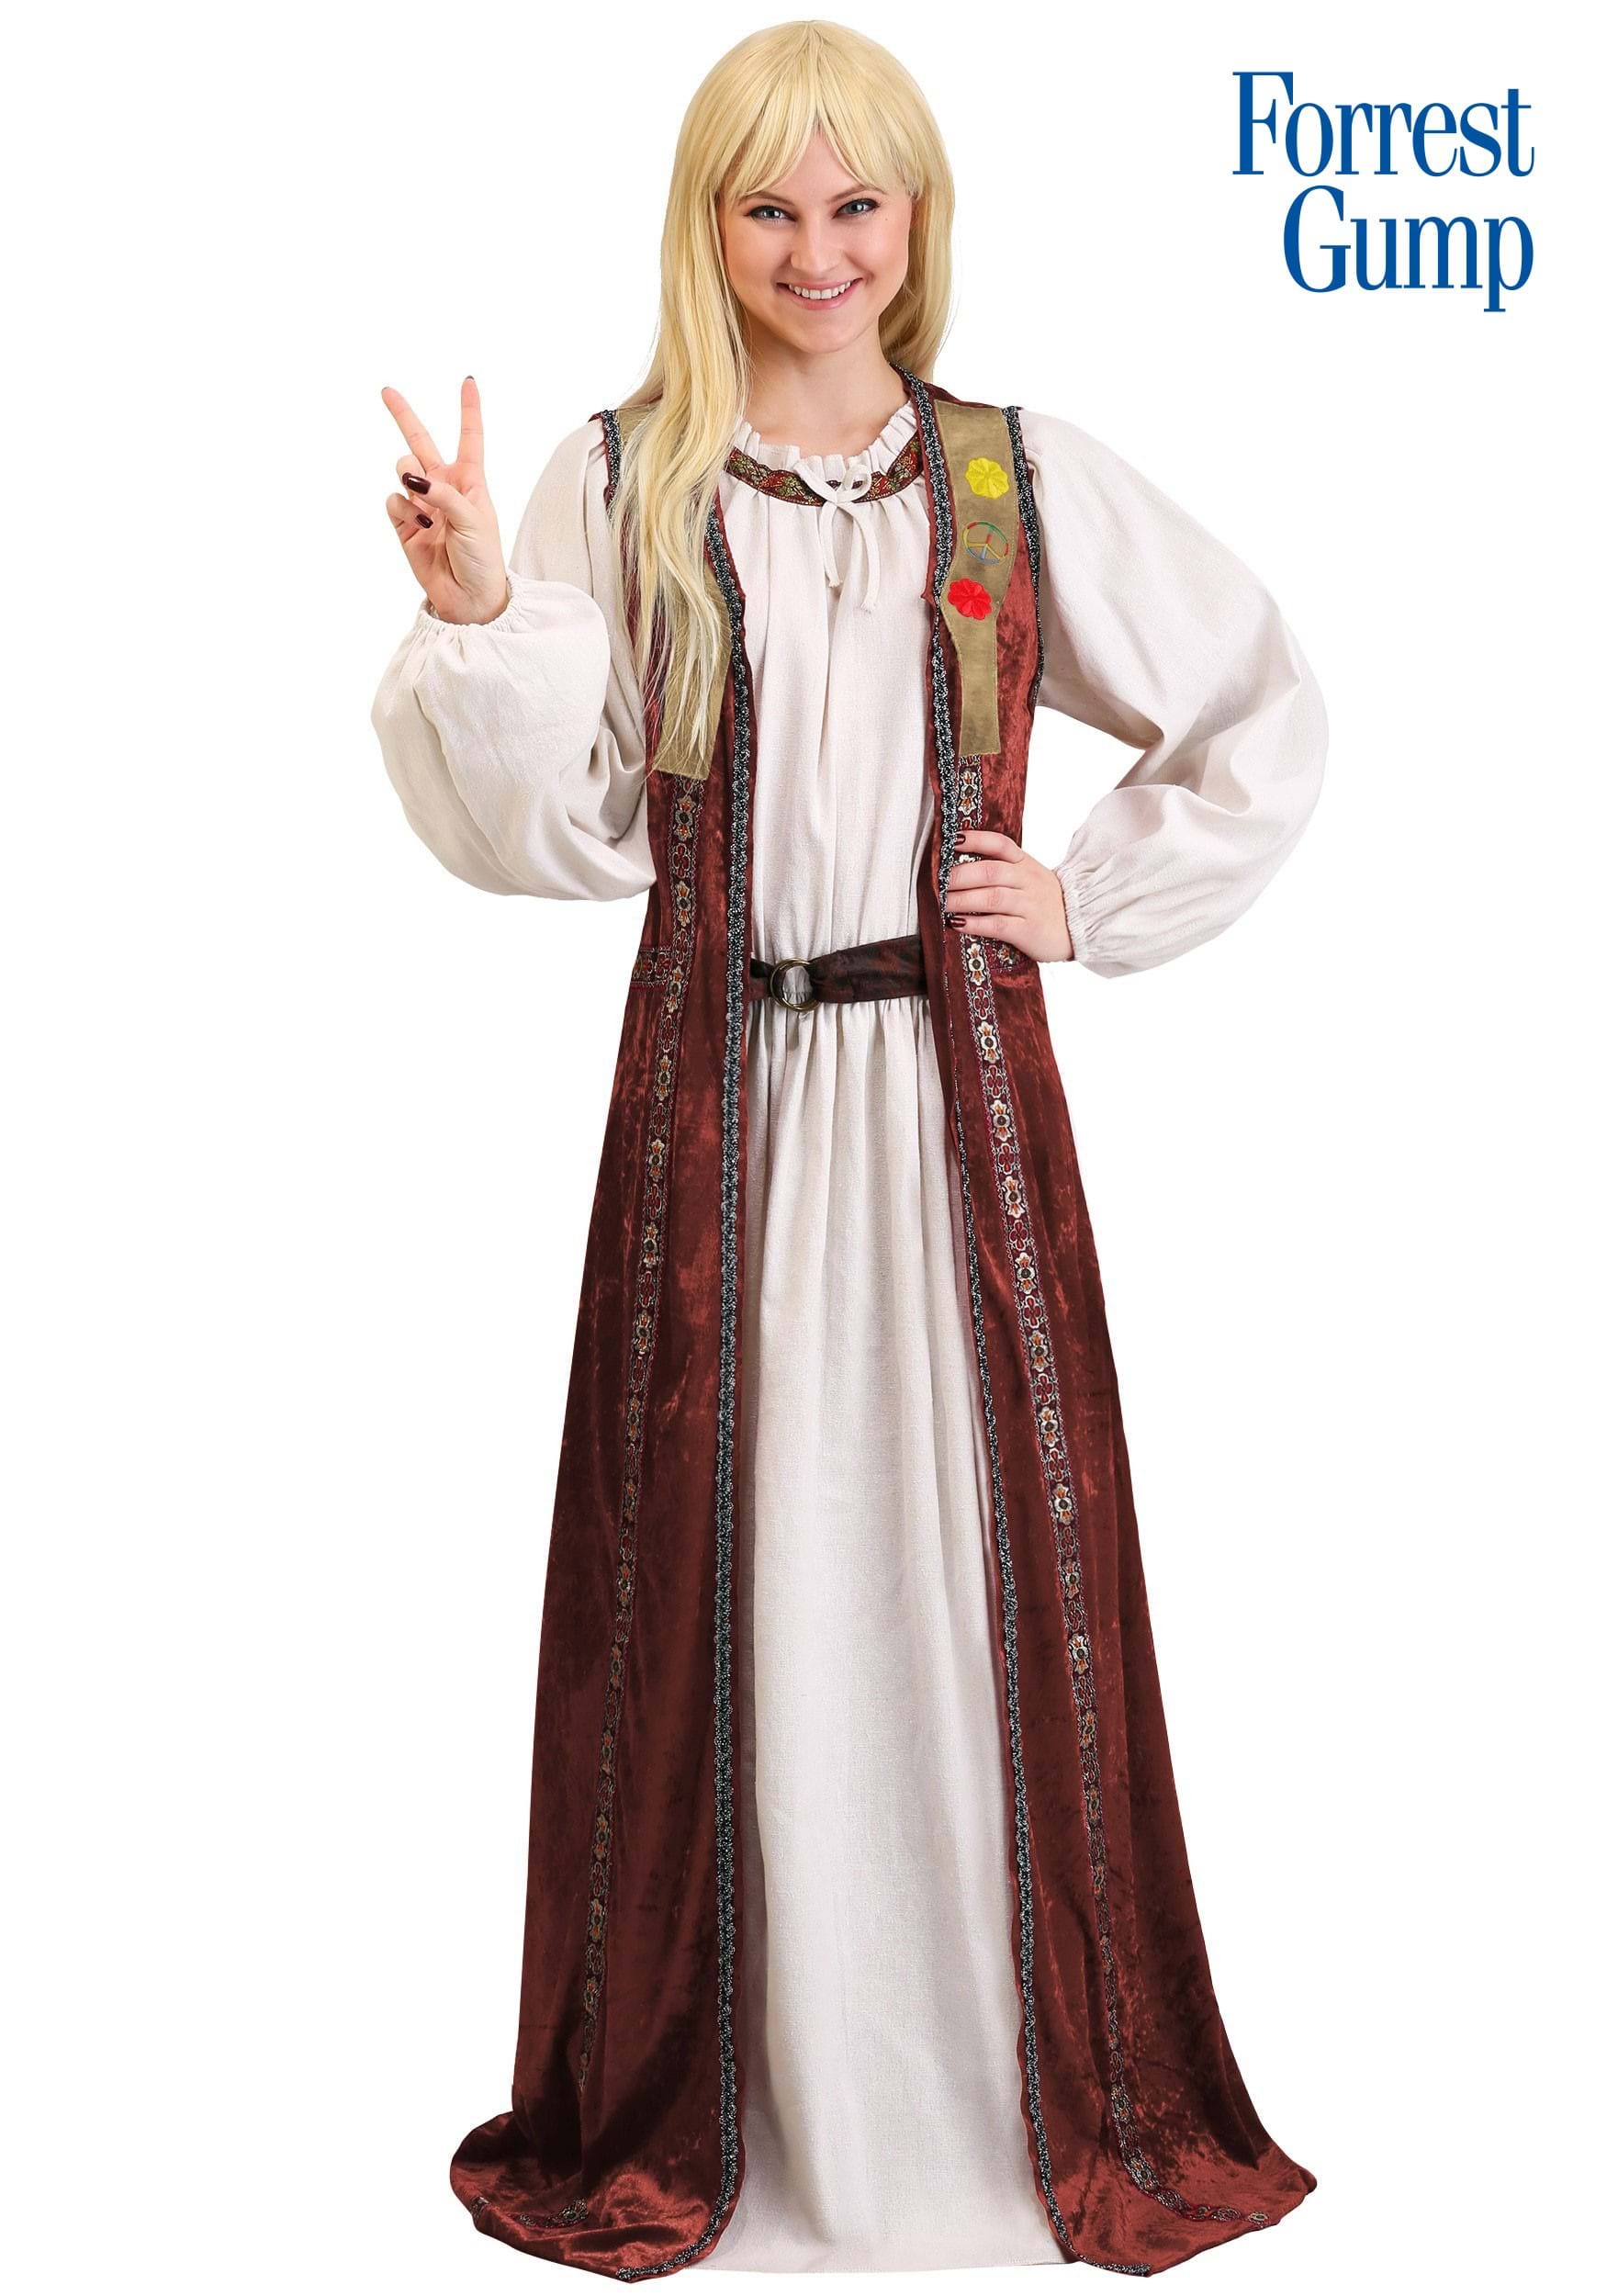 https://images.fun.com/products/53875/1-1/jenny-curran-forrest-gump-adult-costume.jpg